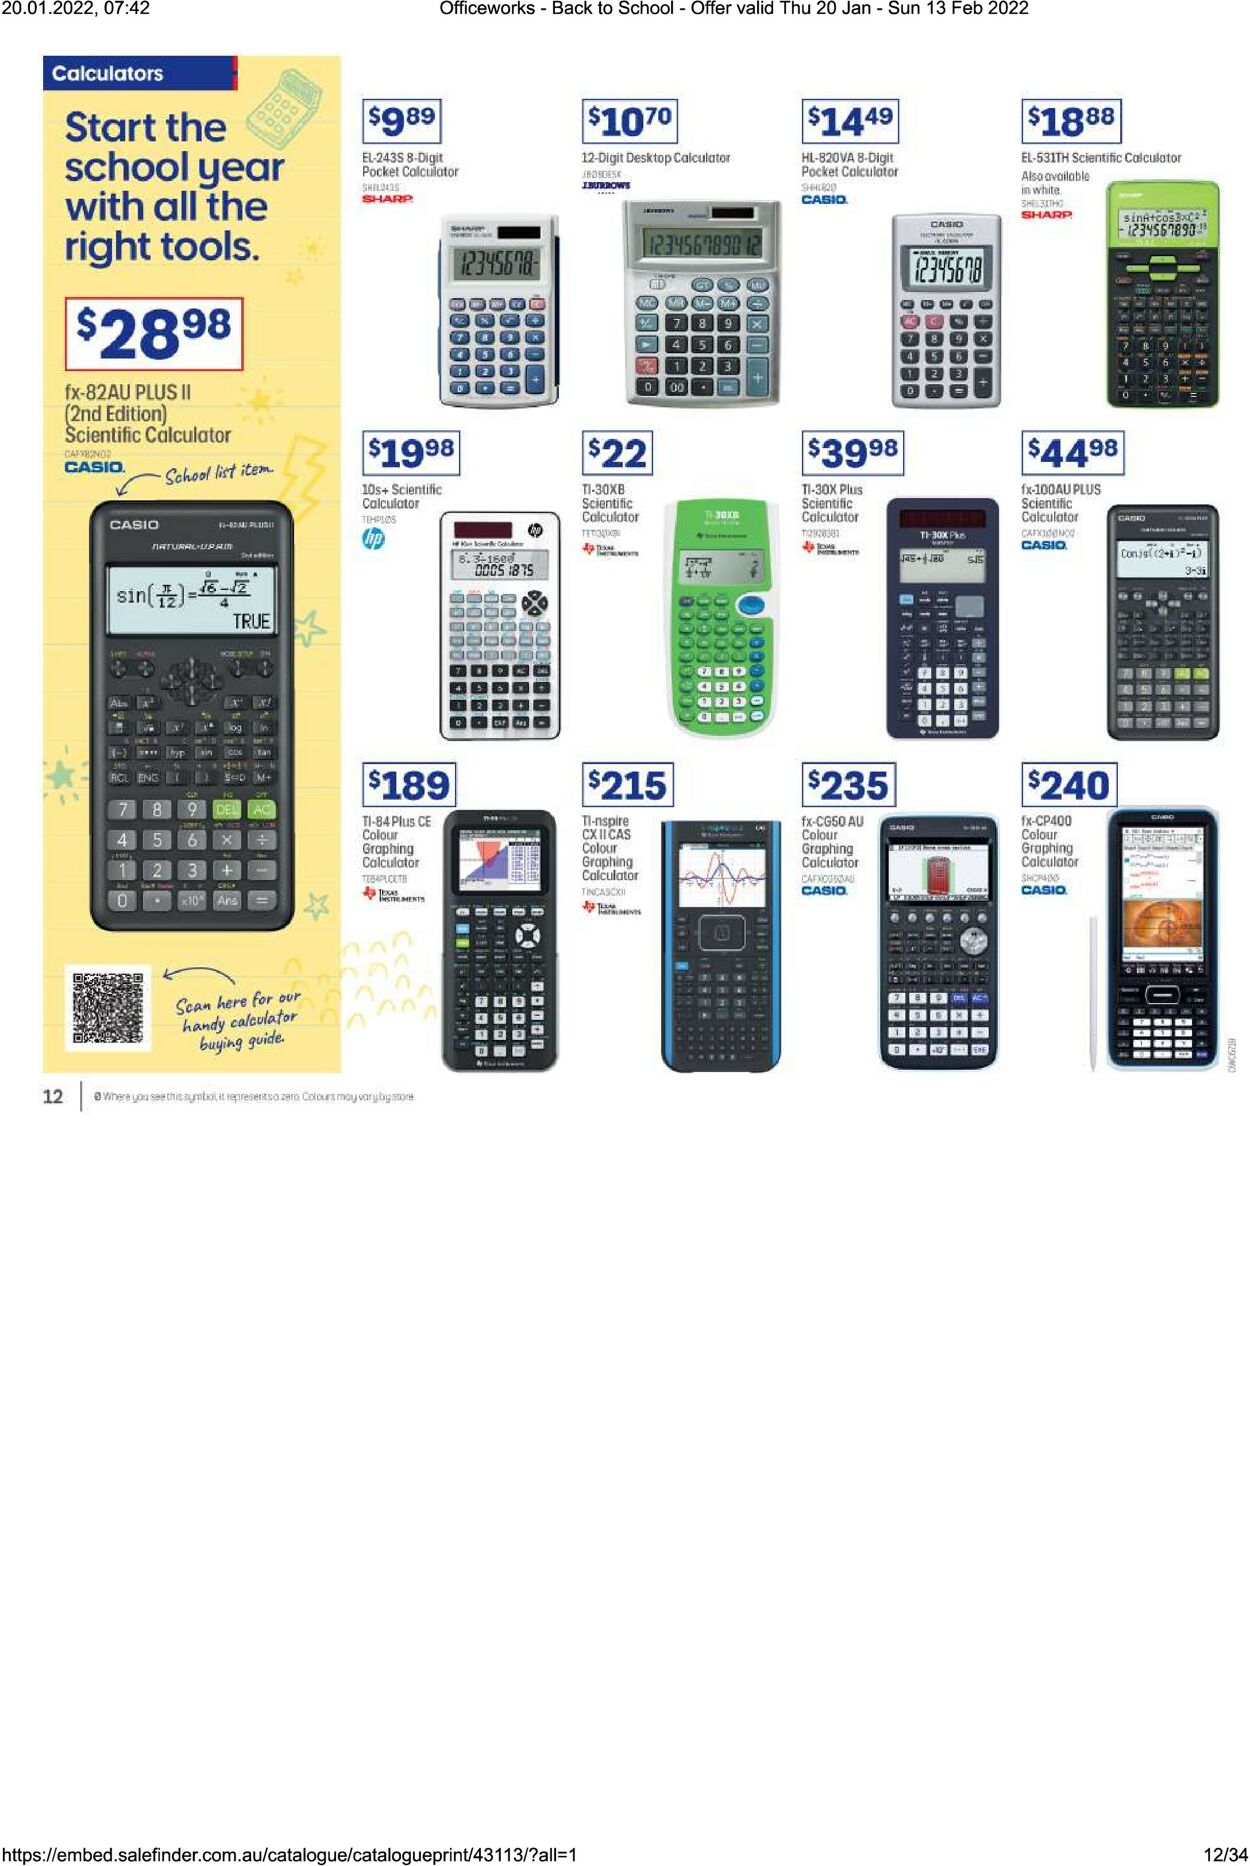 Catalogue Officeworks 20.01.2022 - 13.02.2022